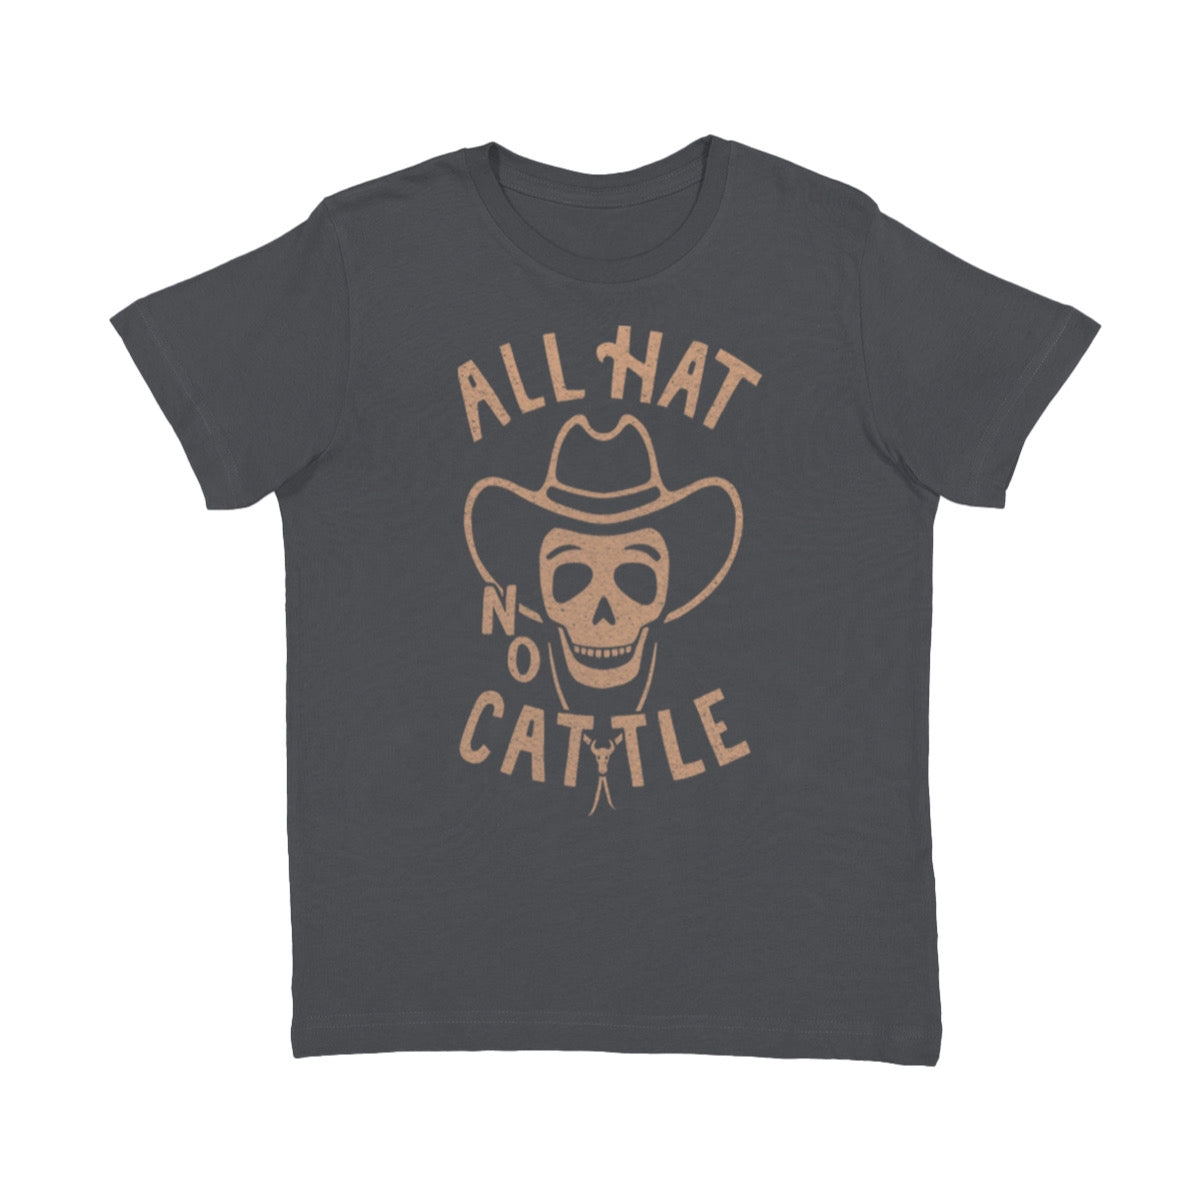 All Hat No Cattle Kids Tee